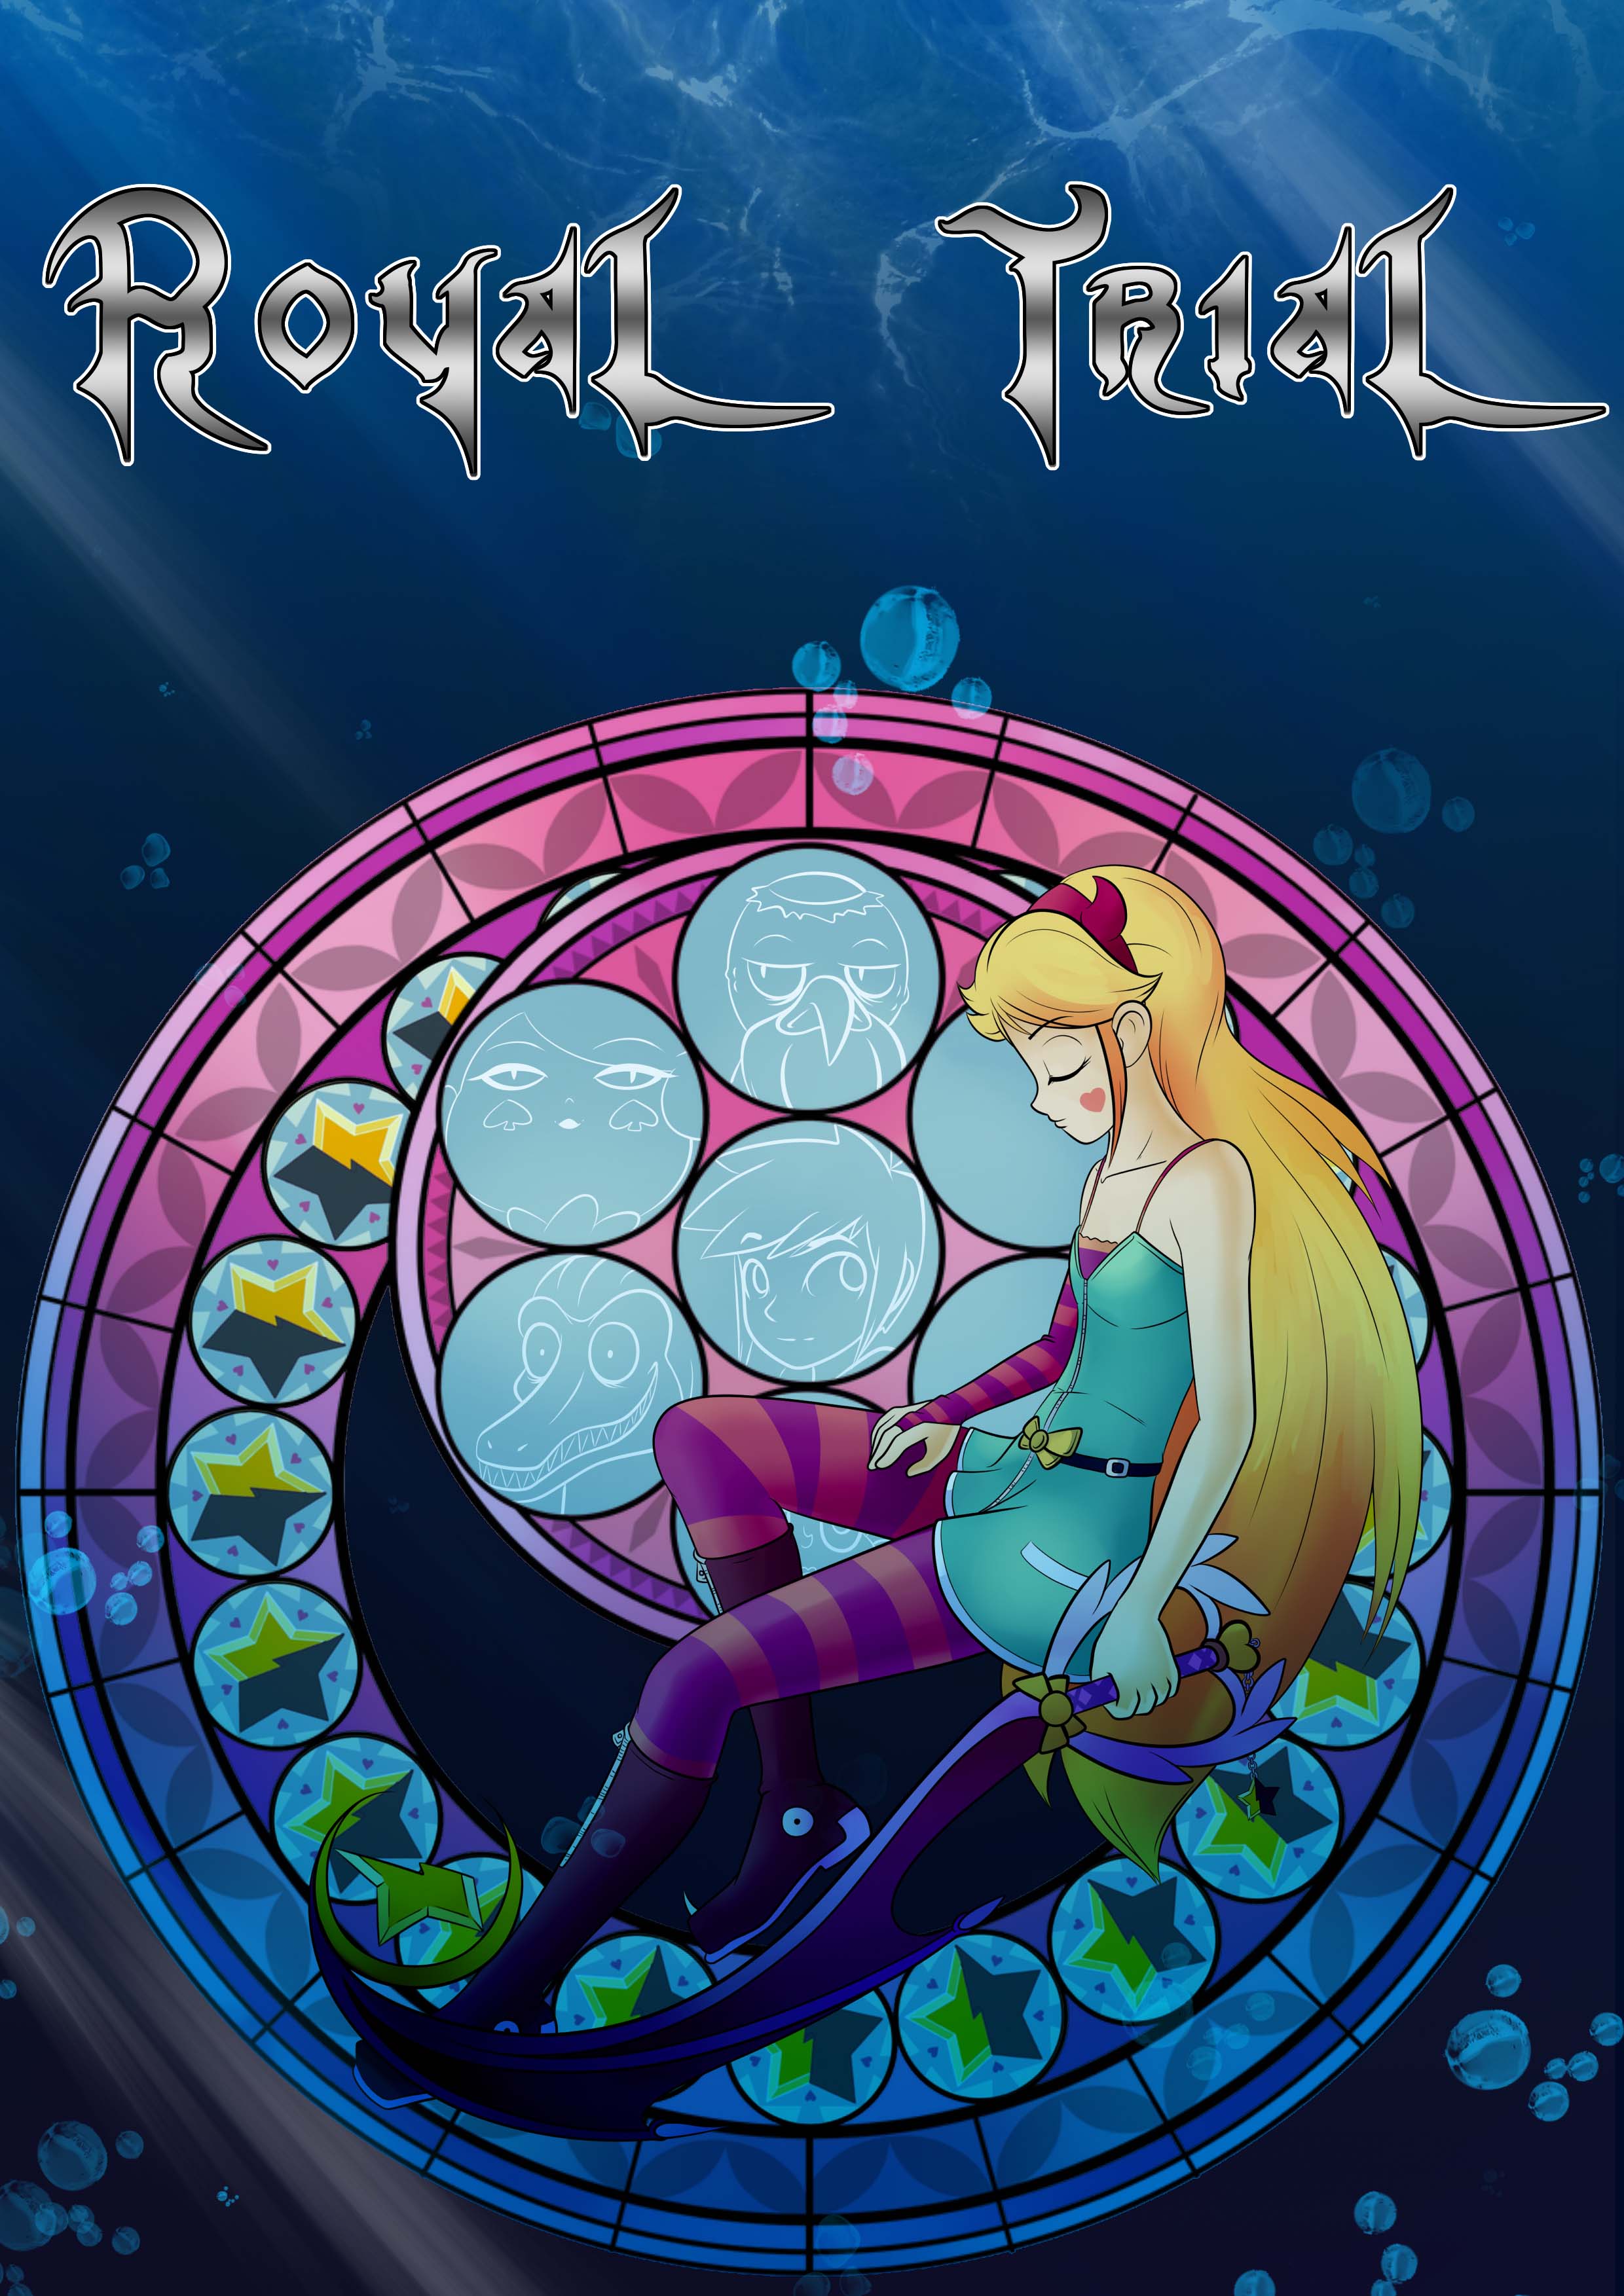 Star vs. the forces of evil sex comic - Royal Trial by BoredomUser - 34 pages - Ongoing